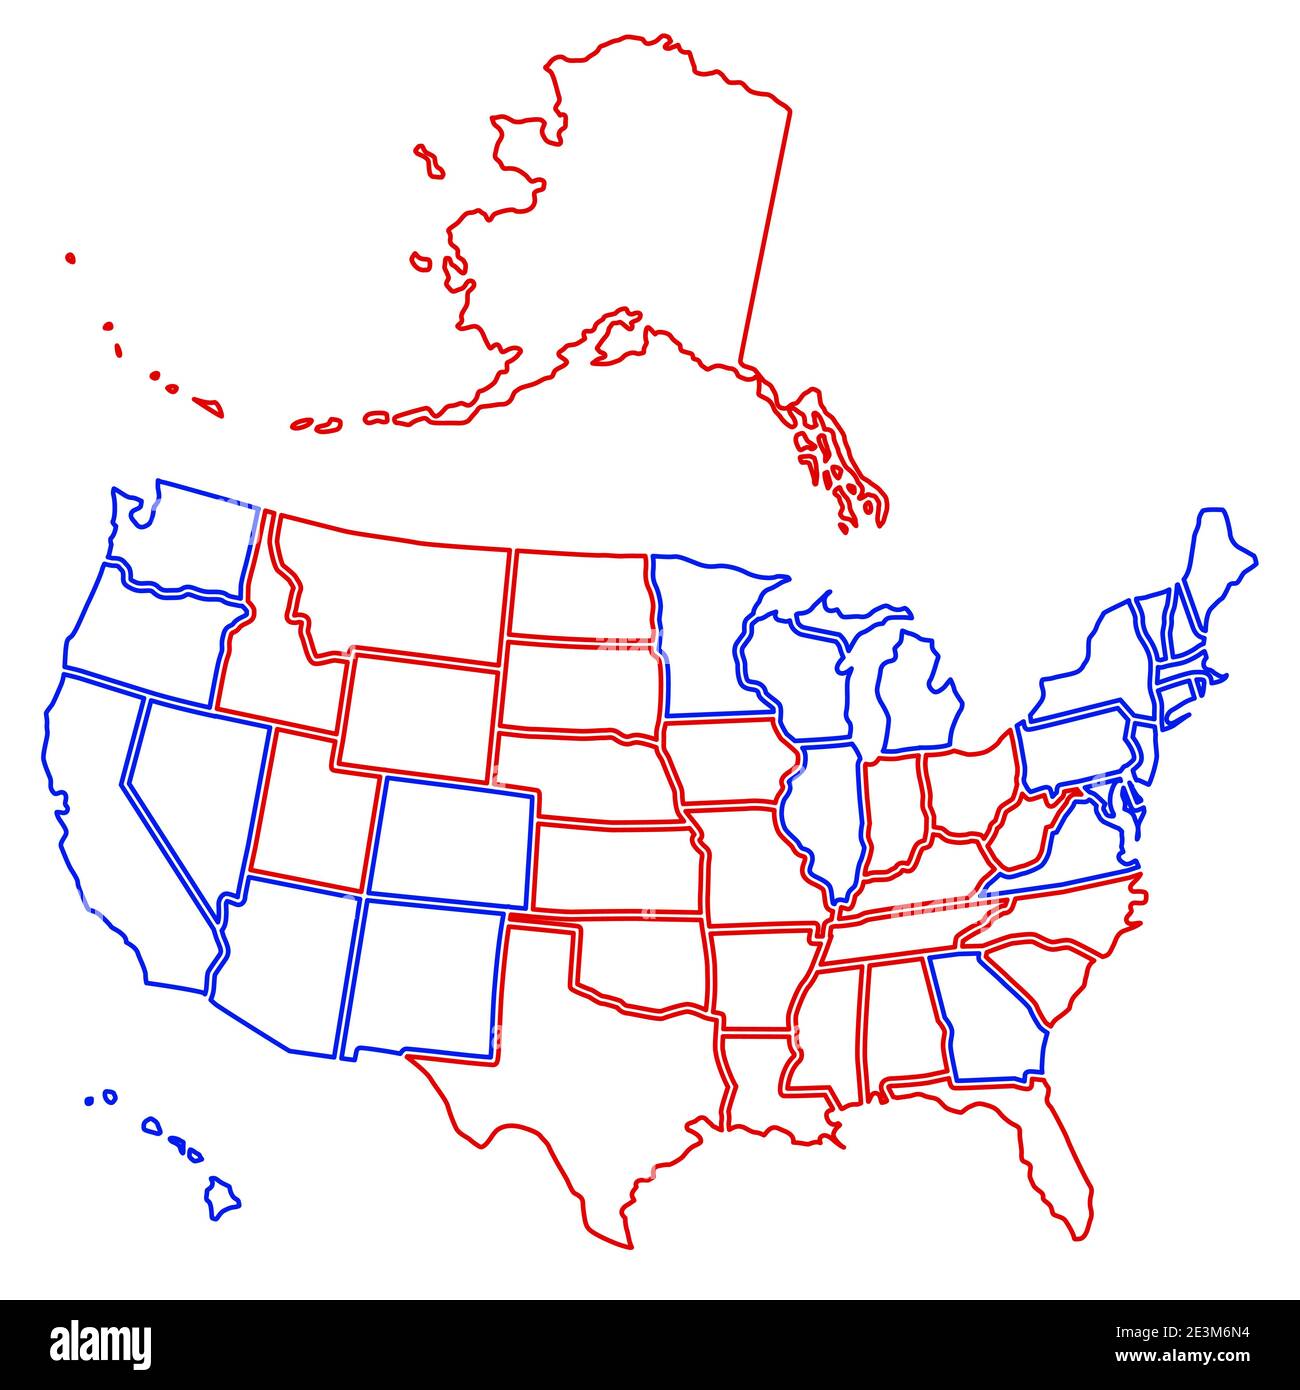 Presidential election 2020 final results on contour map of USA.  Source of map: http://www.lib.utexas.edu/maps/united states/n.america.jpg Stock Vector